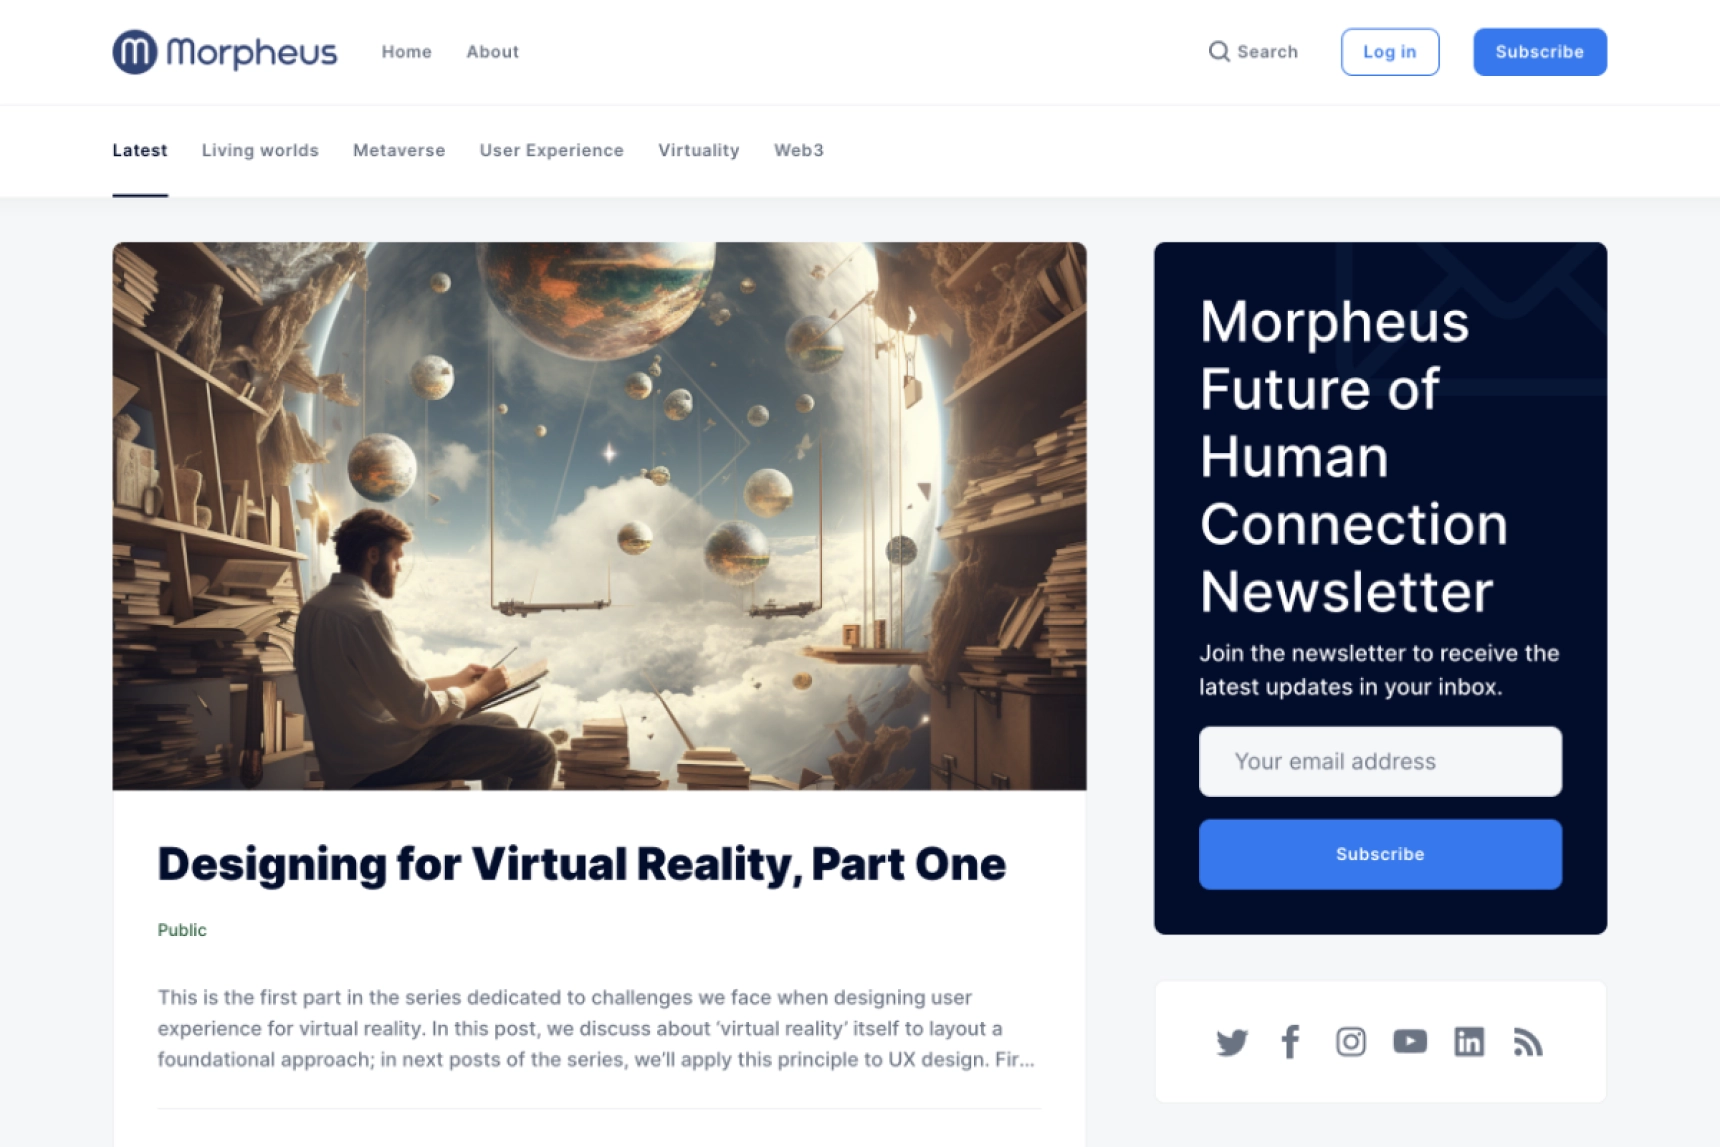 Morpheus Future of Human Connection